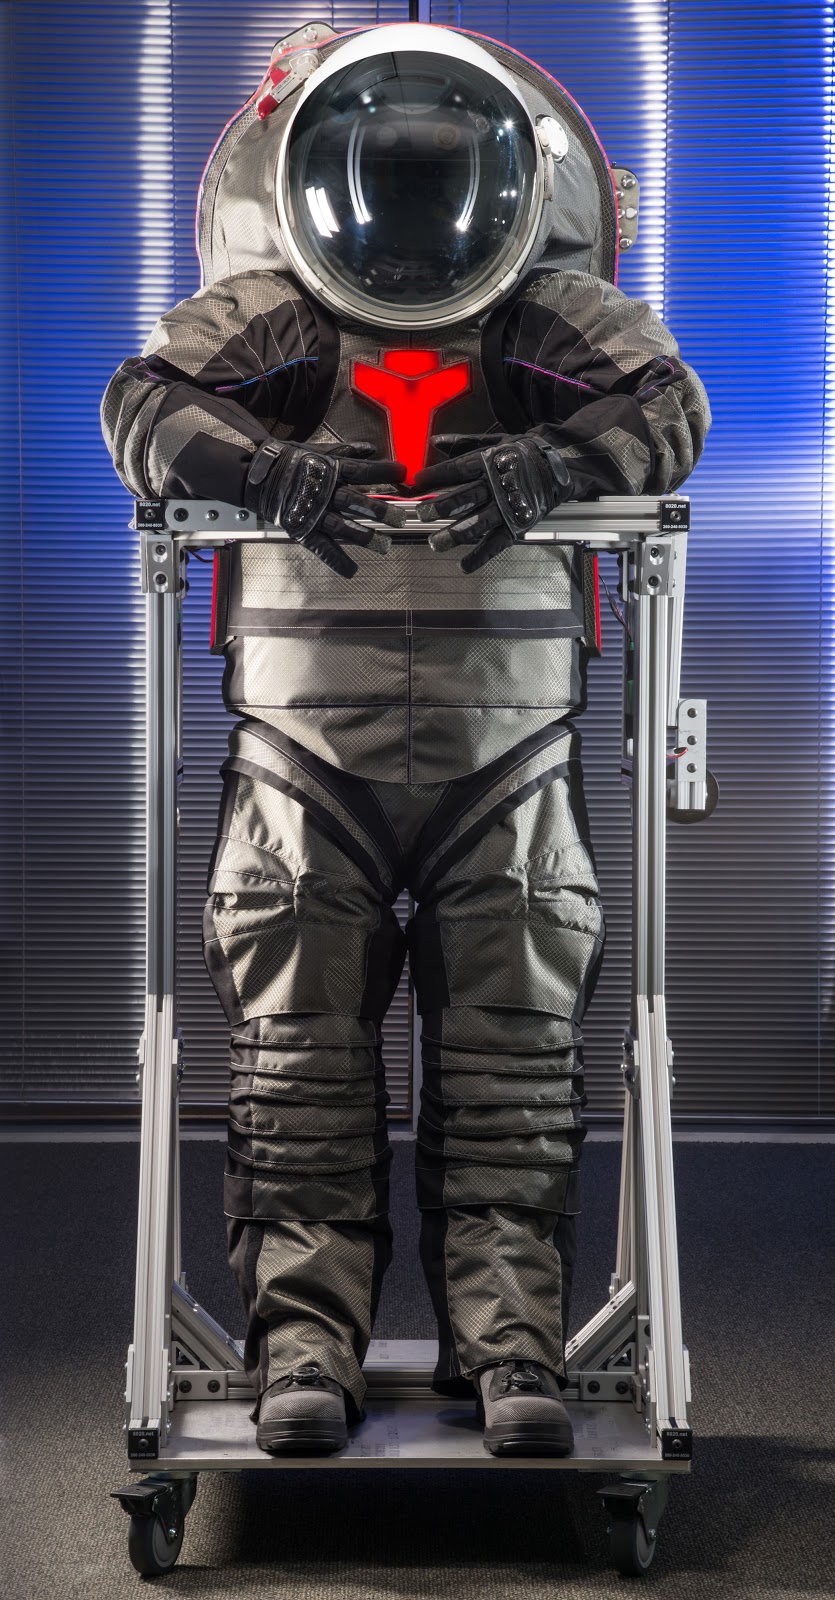 Someday, Astronauts Might Have Clothes As Cool As These Mass Effect Uniforms